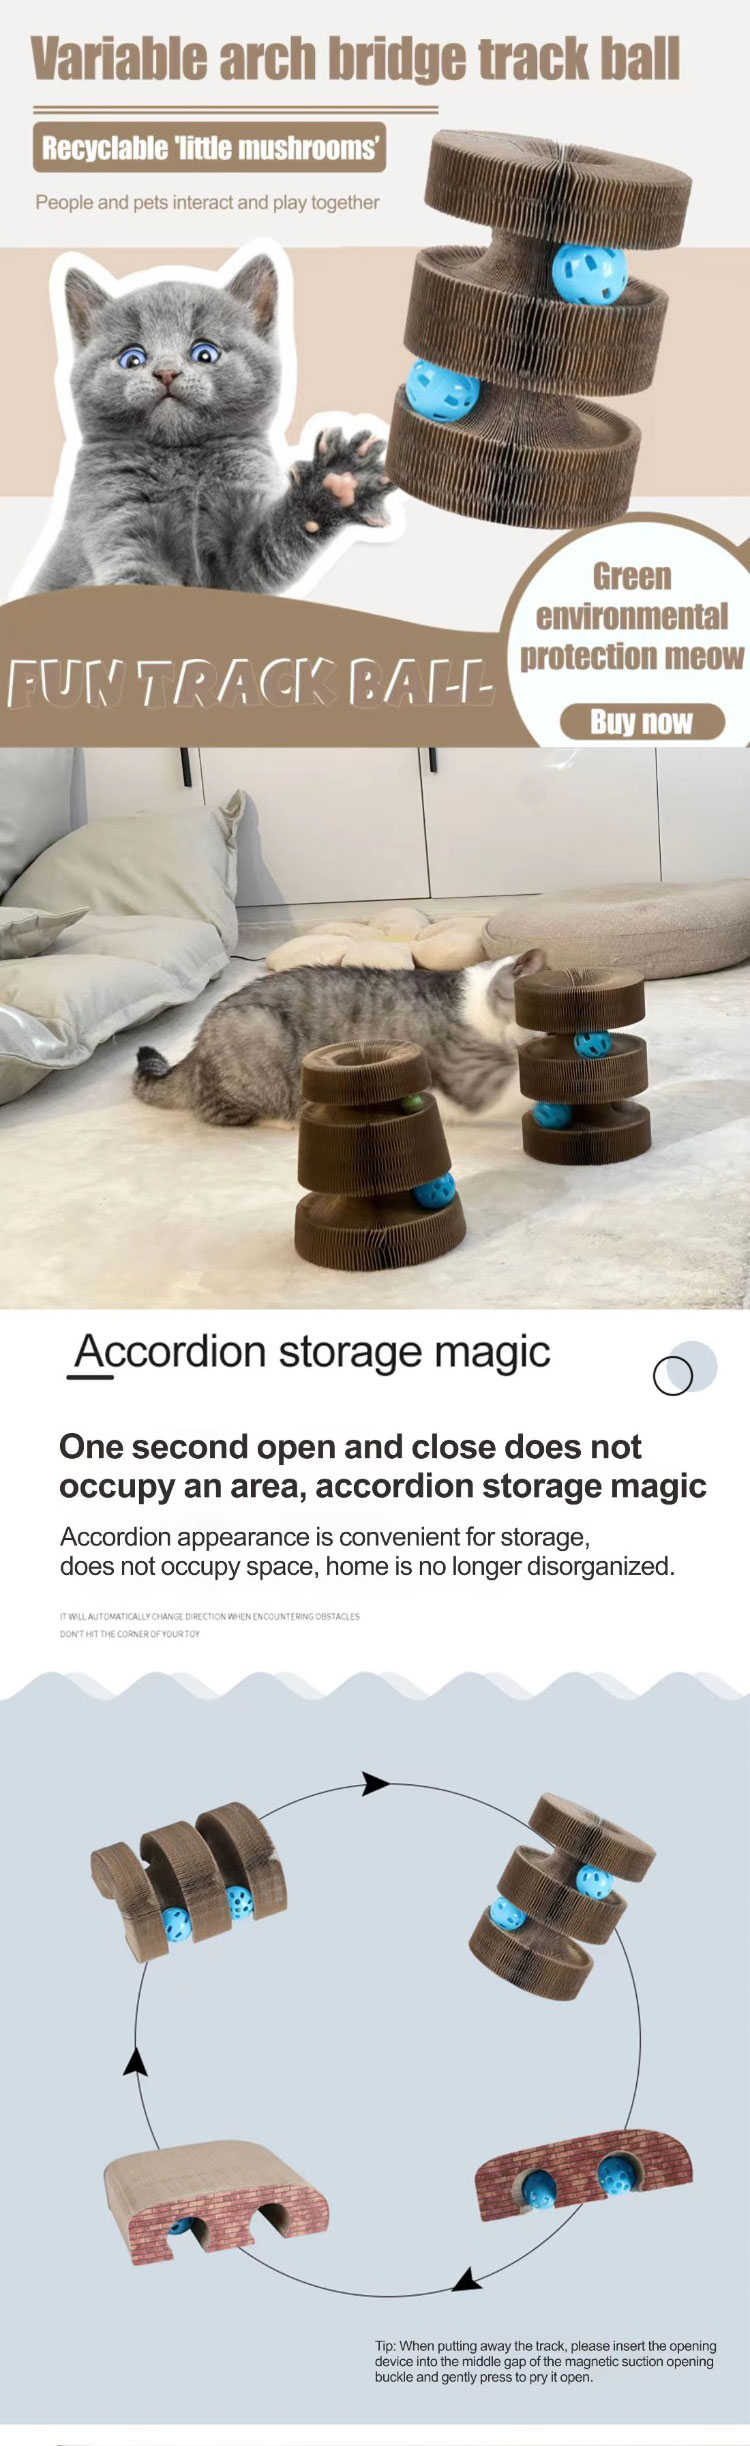 New Magic Accordion Cat Scratching Variable track Ball Toy